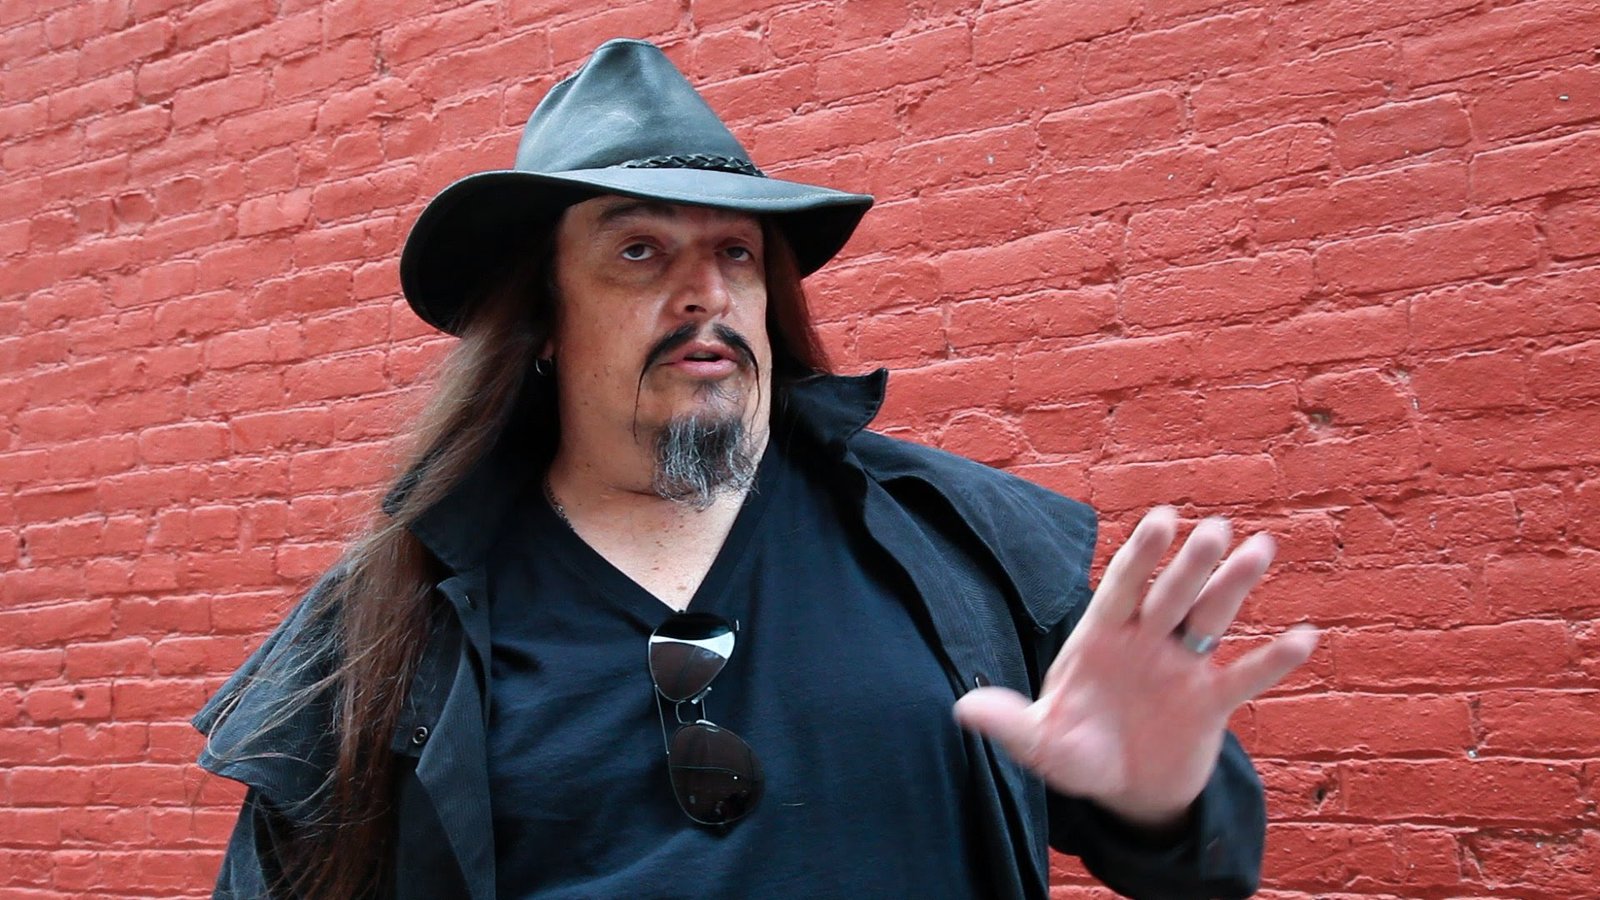 Exclusive Interview with Aron Ra – Public Speaker, Atheist Vlogger, and Activist